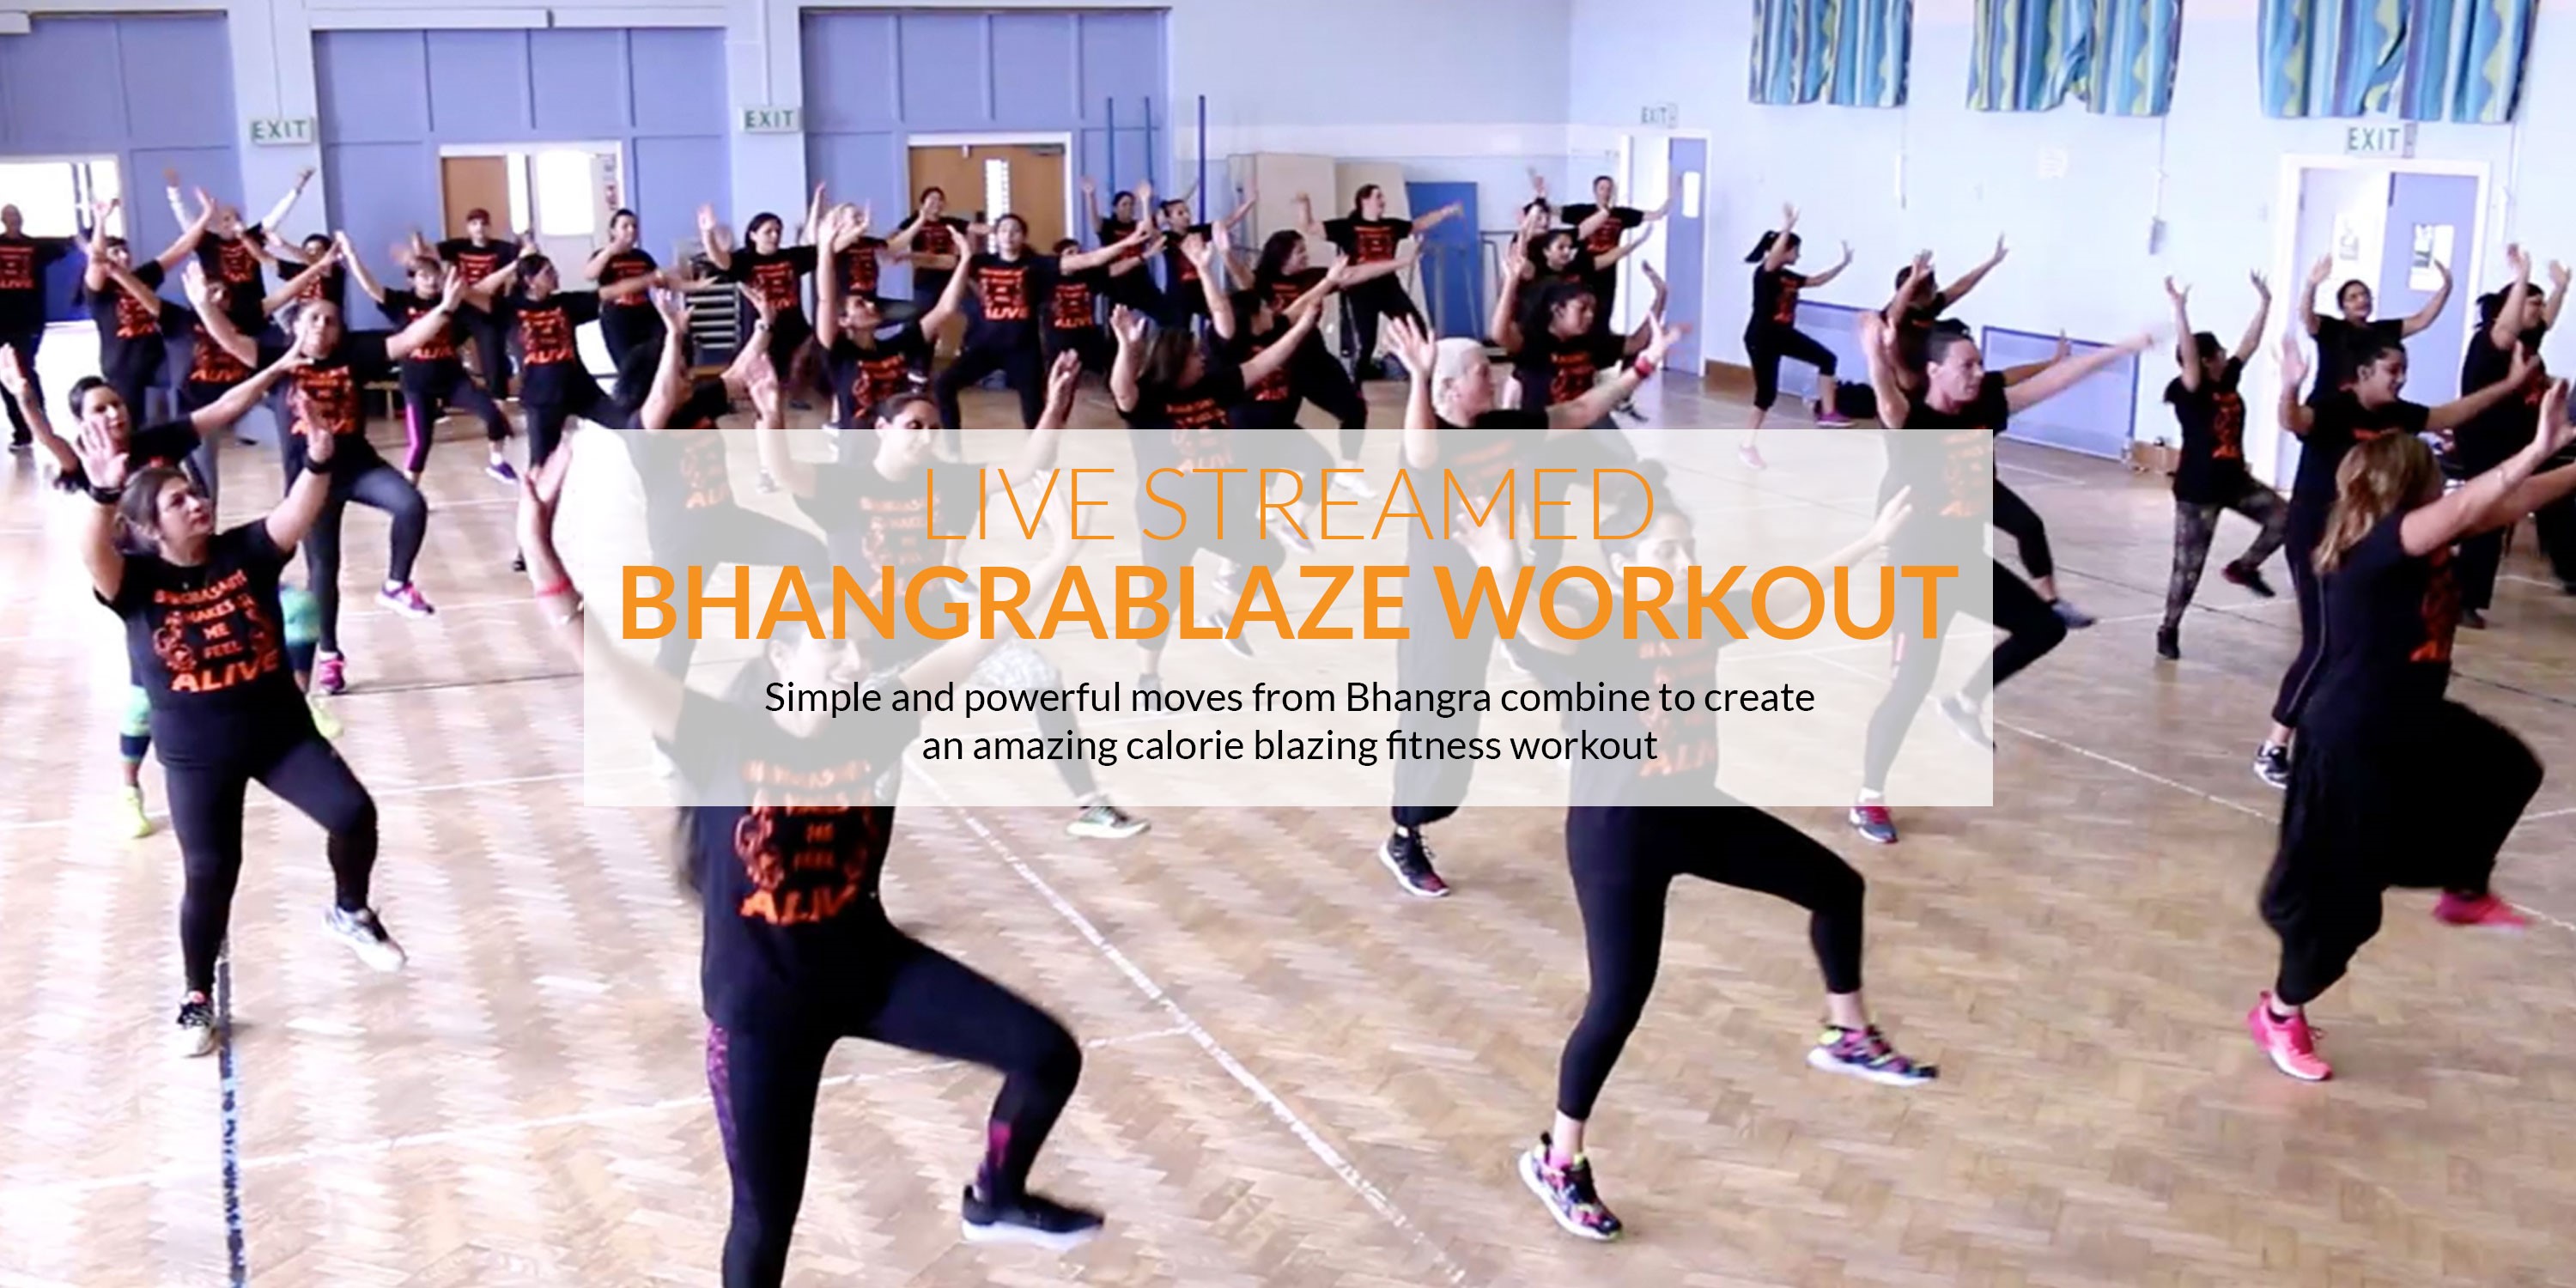 The best BhangraBlaze Workout live-streamed